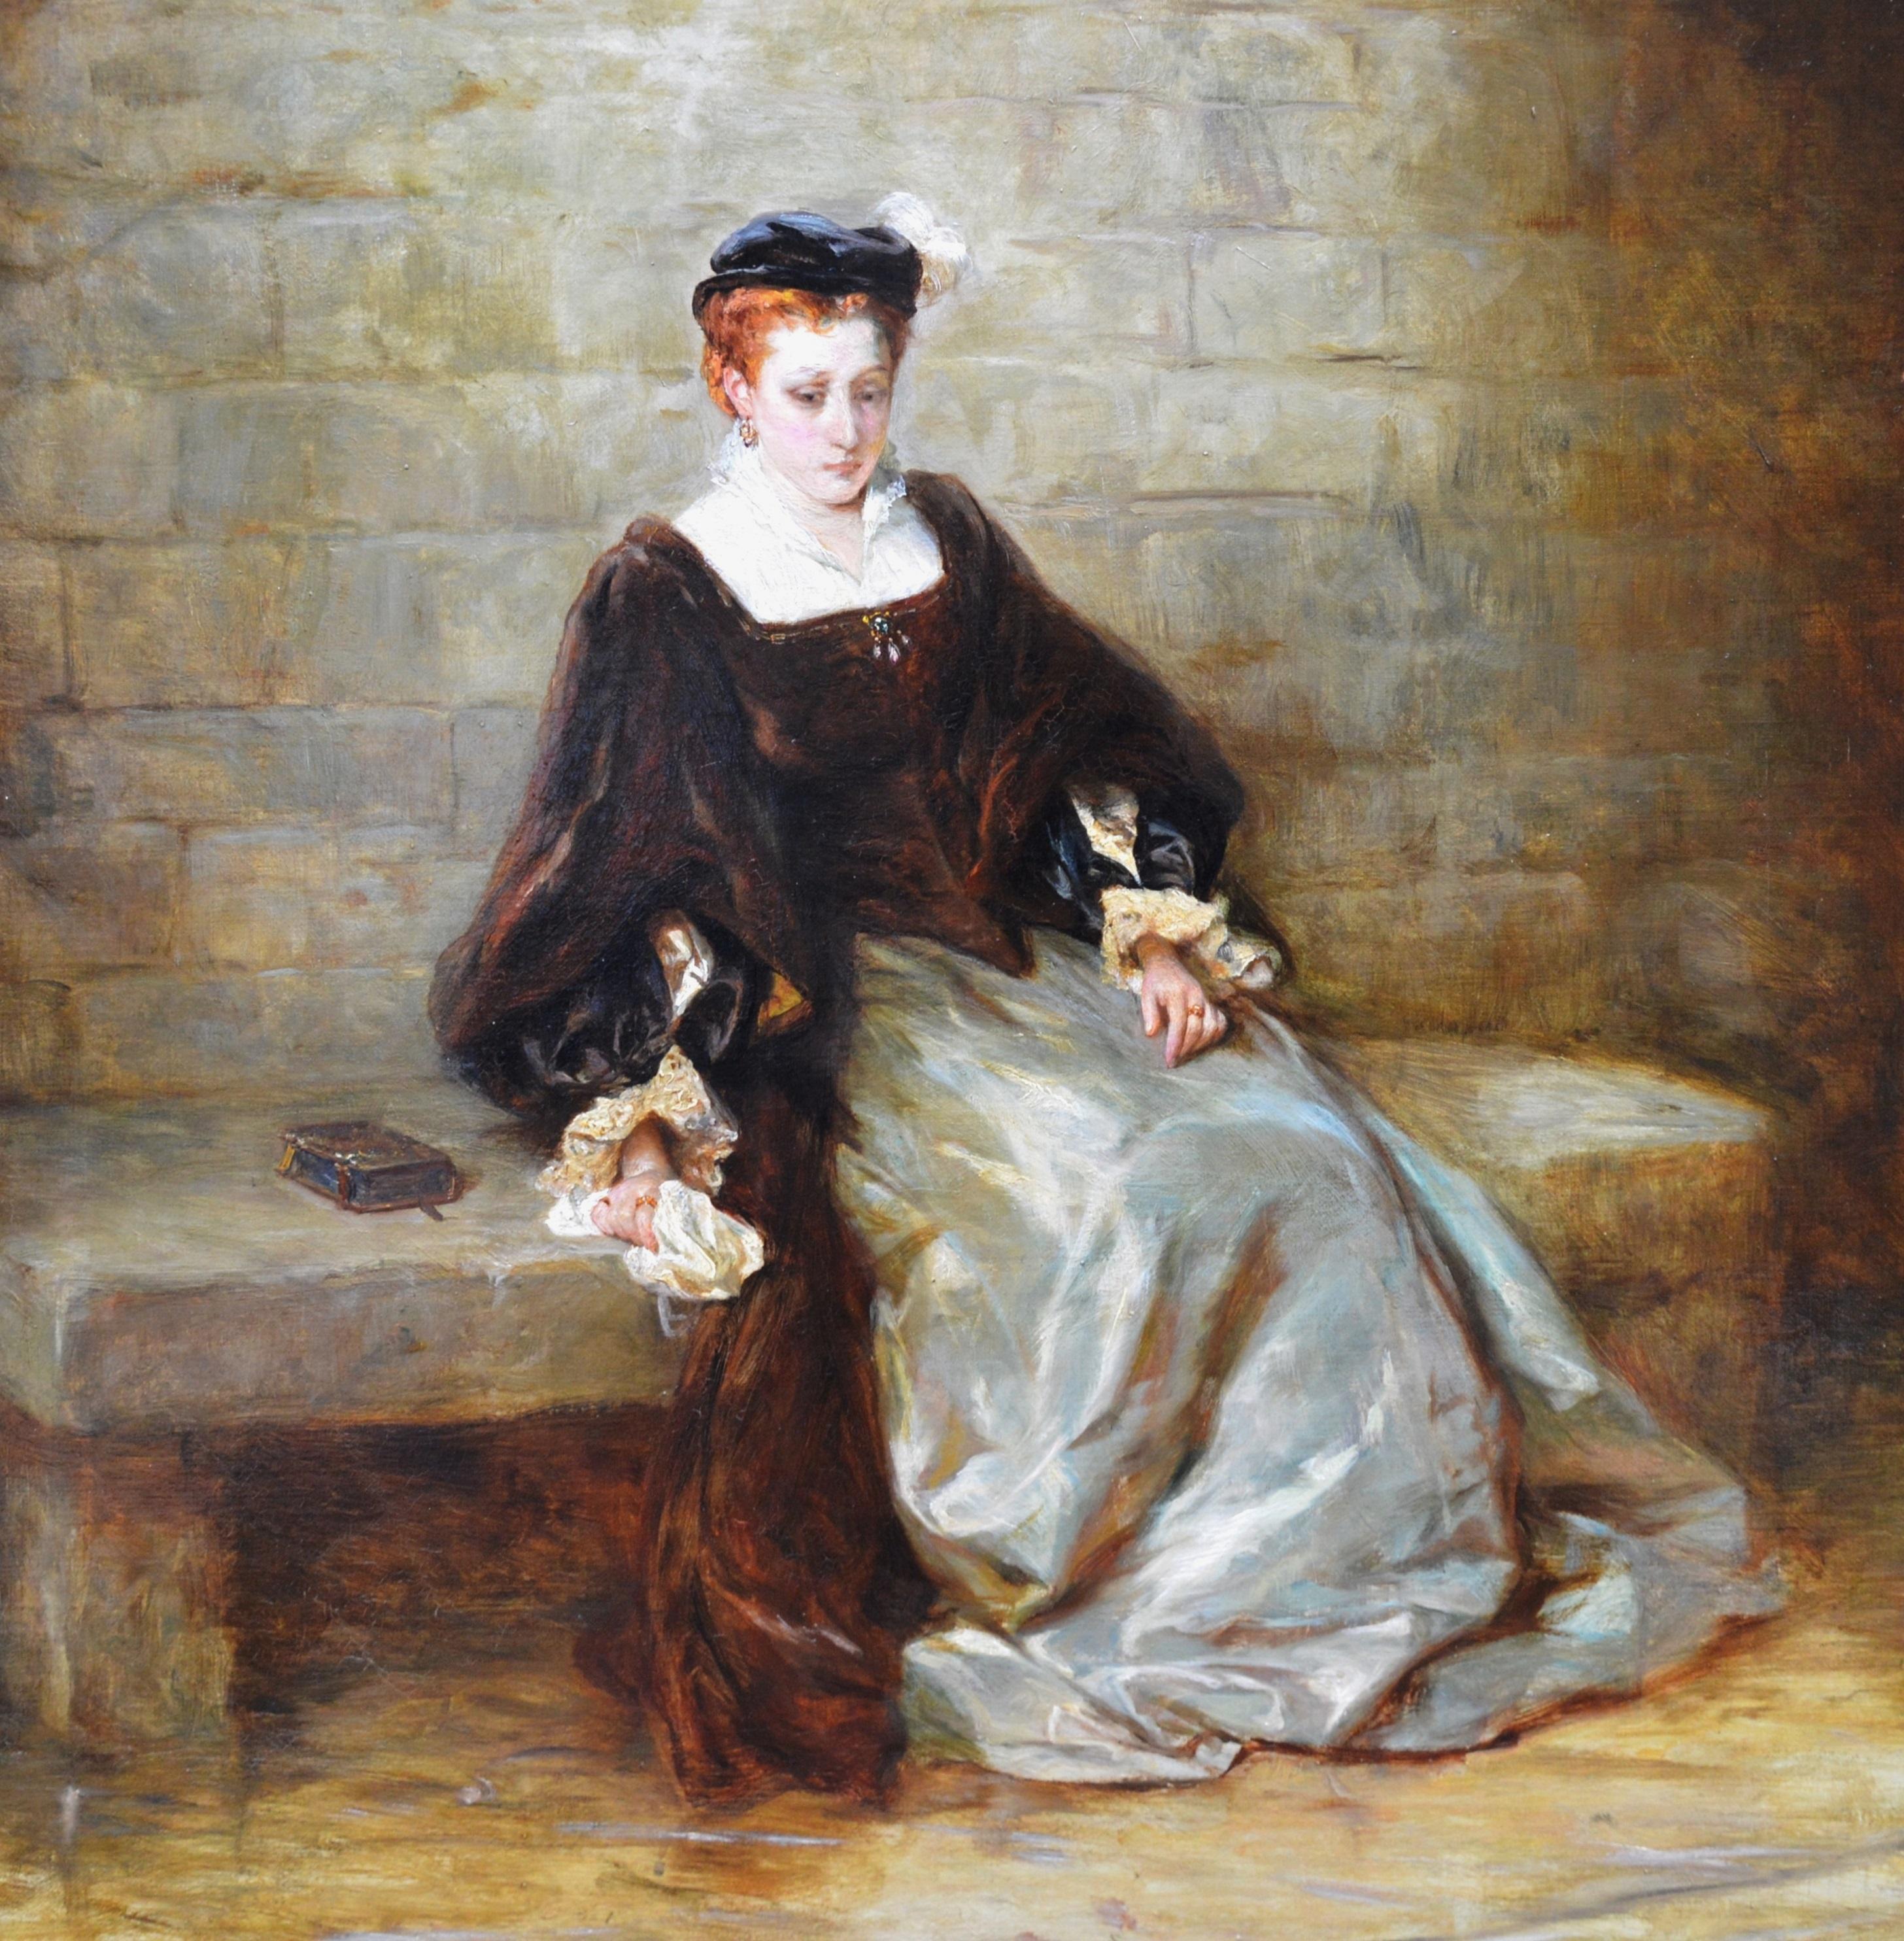 Elizabeth in the Tower - 19th Century Oil Painting Famous Scene Tower of London  - Black Interior Painting by Robert Alexander Hillingford